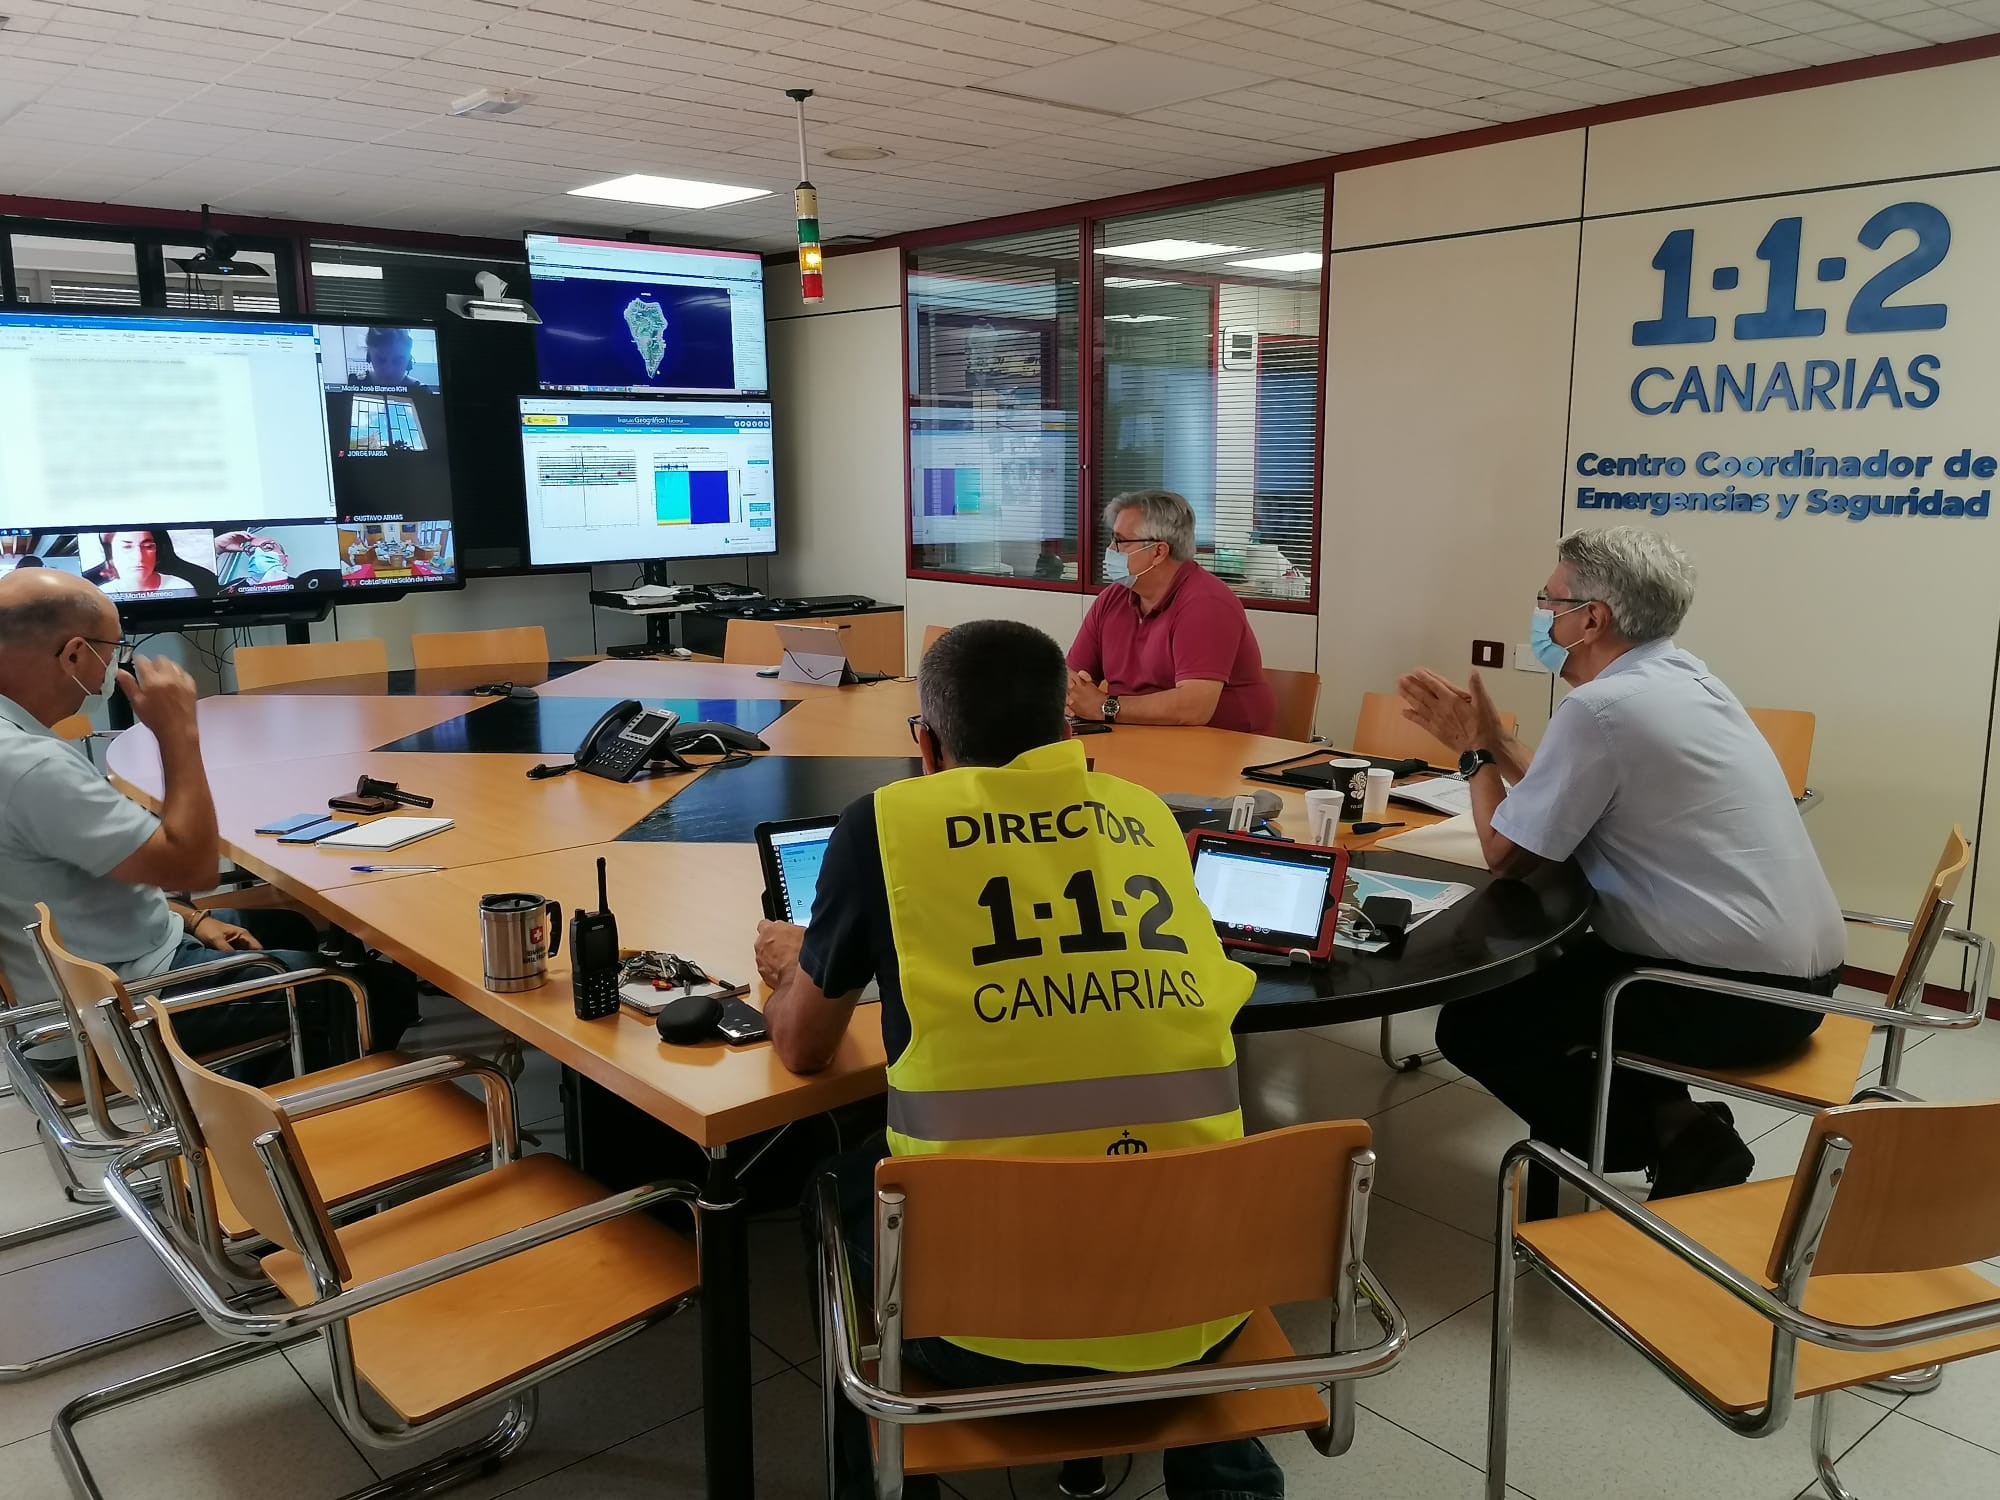 This photo shows a meeting with the director of 112 Canarias and specialists on September 19th to finalise and announce evacuation plans. Sourced from Gobierno de Canarias (2021).